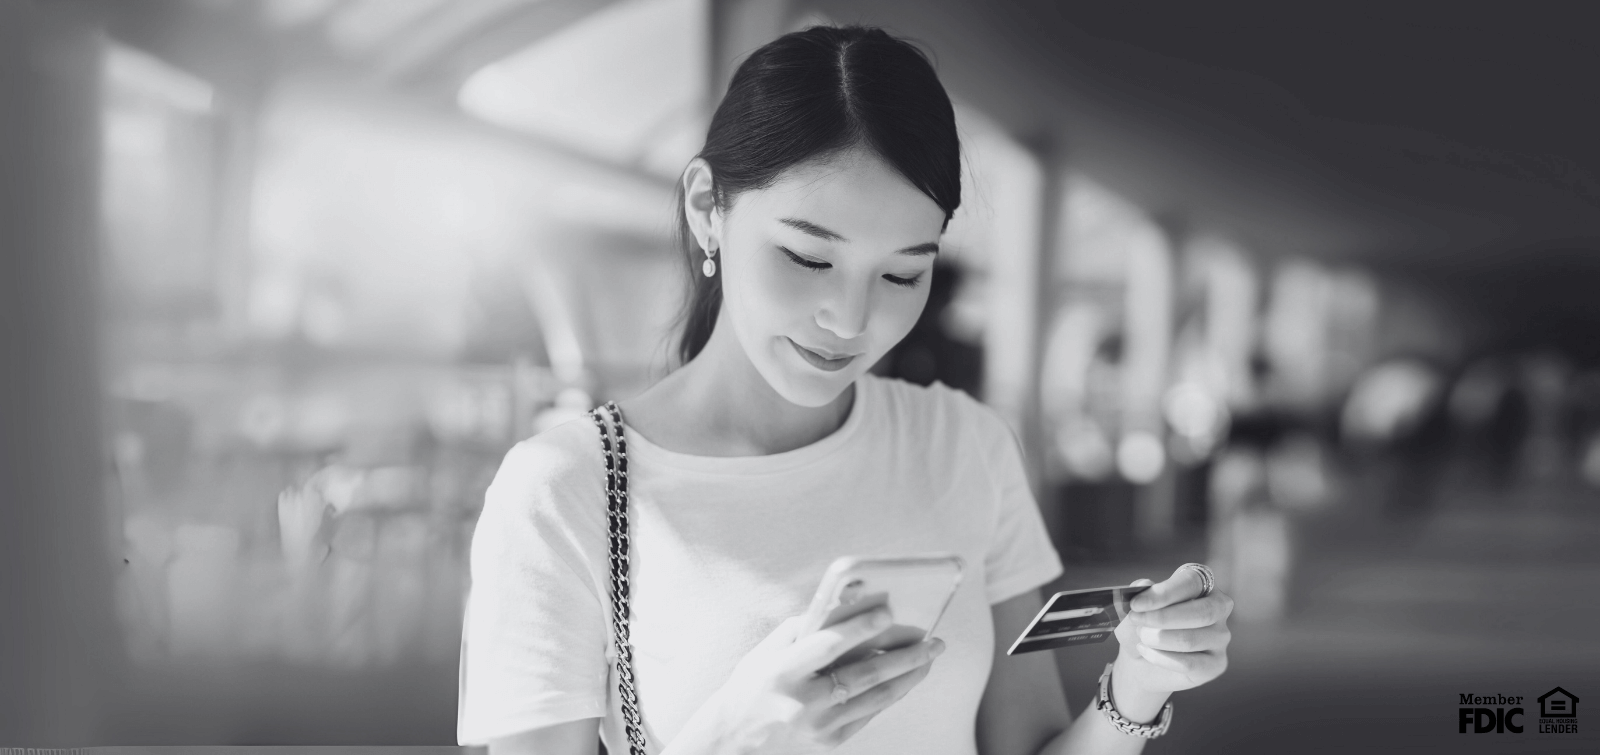 a young woman checks her credit card balance on her phone